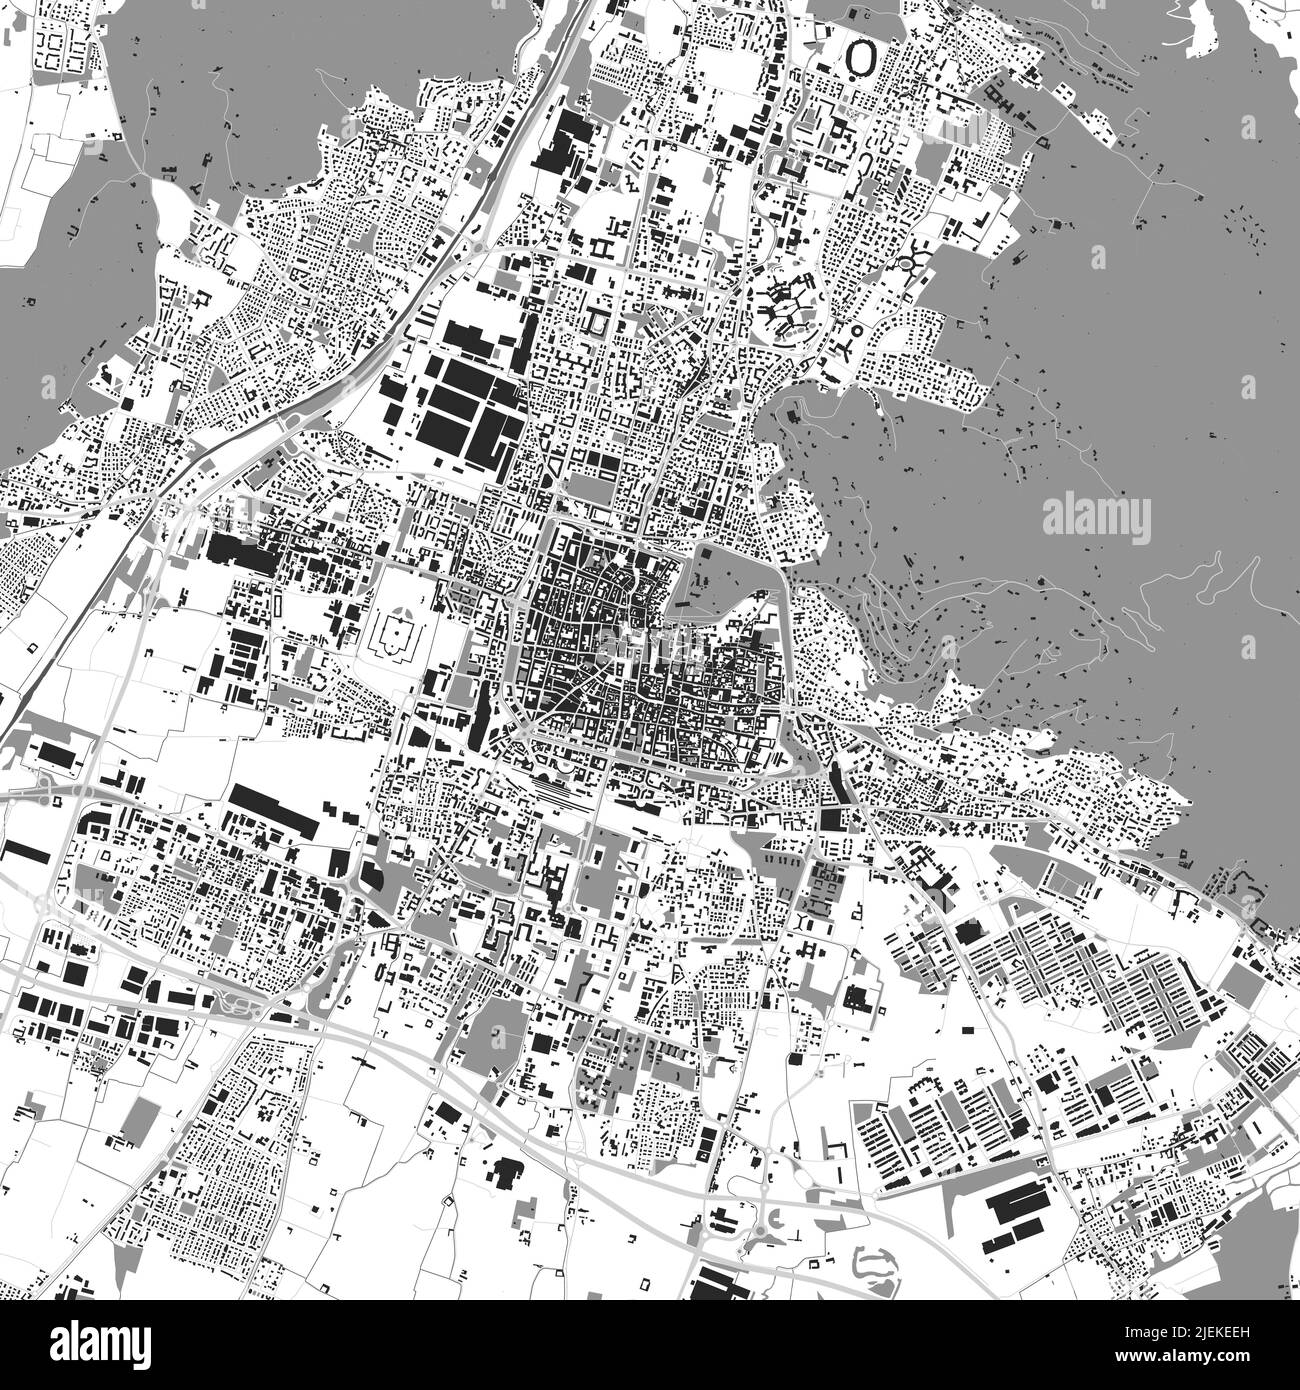 Urban city vector map of Brescia. Vector illustration, Brescia map grayscale black and white art poster. Street map image with roads, metropolitan cit Stock Vector